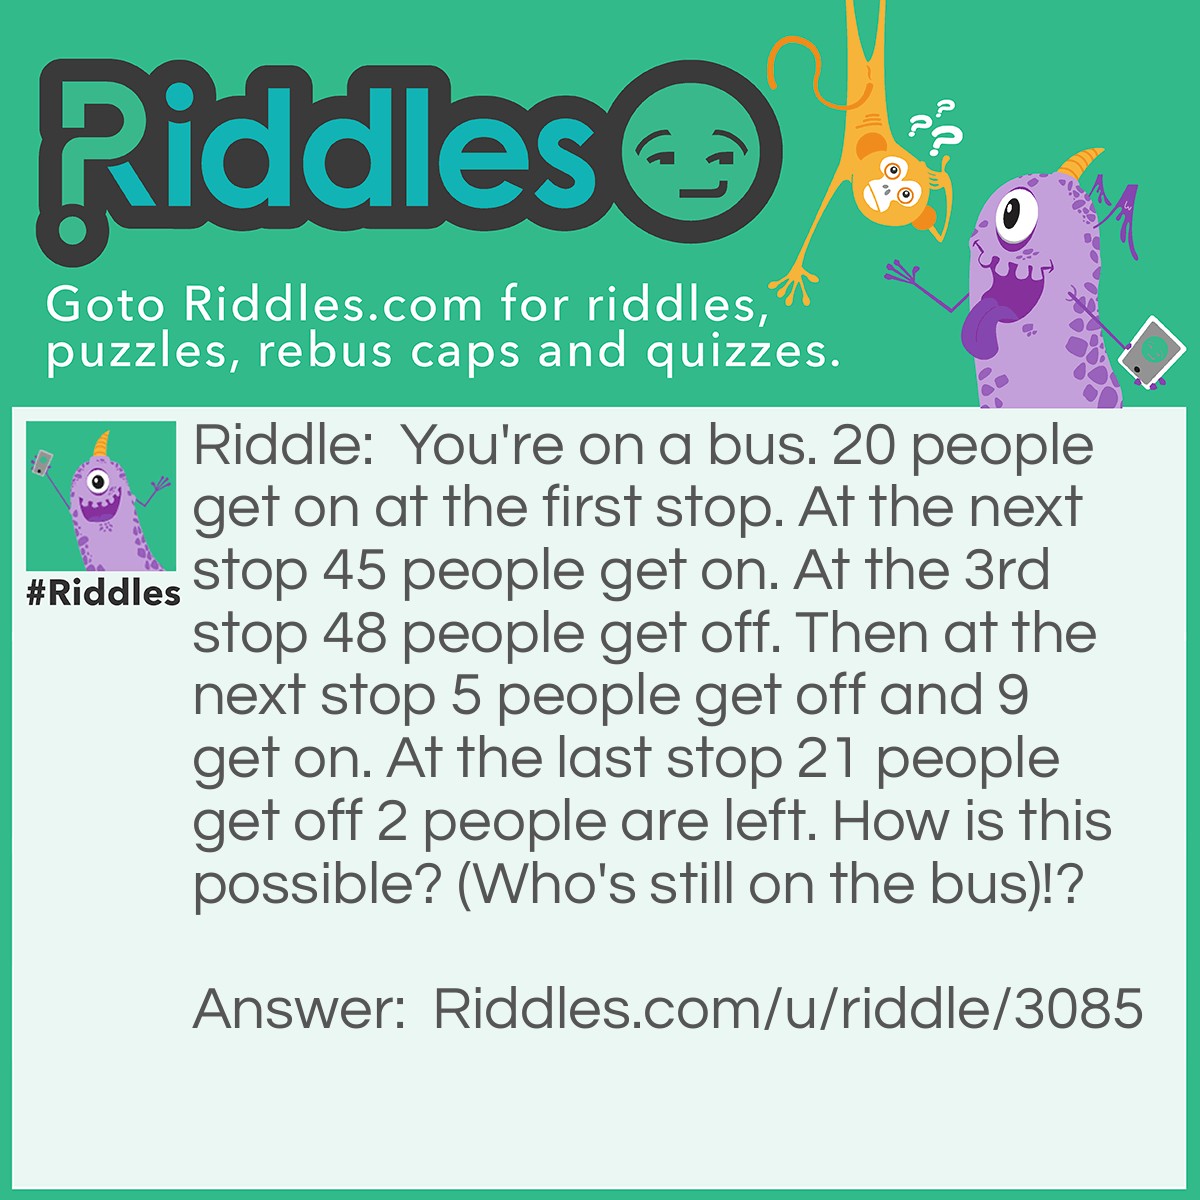 Riddle: You're on a bus. 20 people get on at the first stop. At the next stop 45 people get on. At the 3rd stop 48 people get off. Then at the next stop 5 people get off and 9 get on. At the last stop 21 people get off 2 people are left. How is this possible? (Who's still on the bus)!? Answer: This is possible because you and the bus driver are still on the bus!